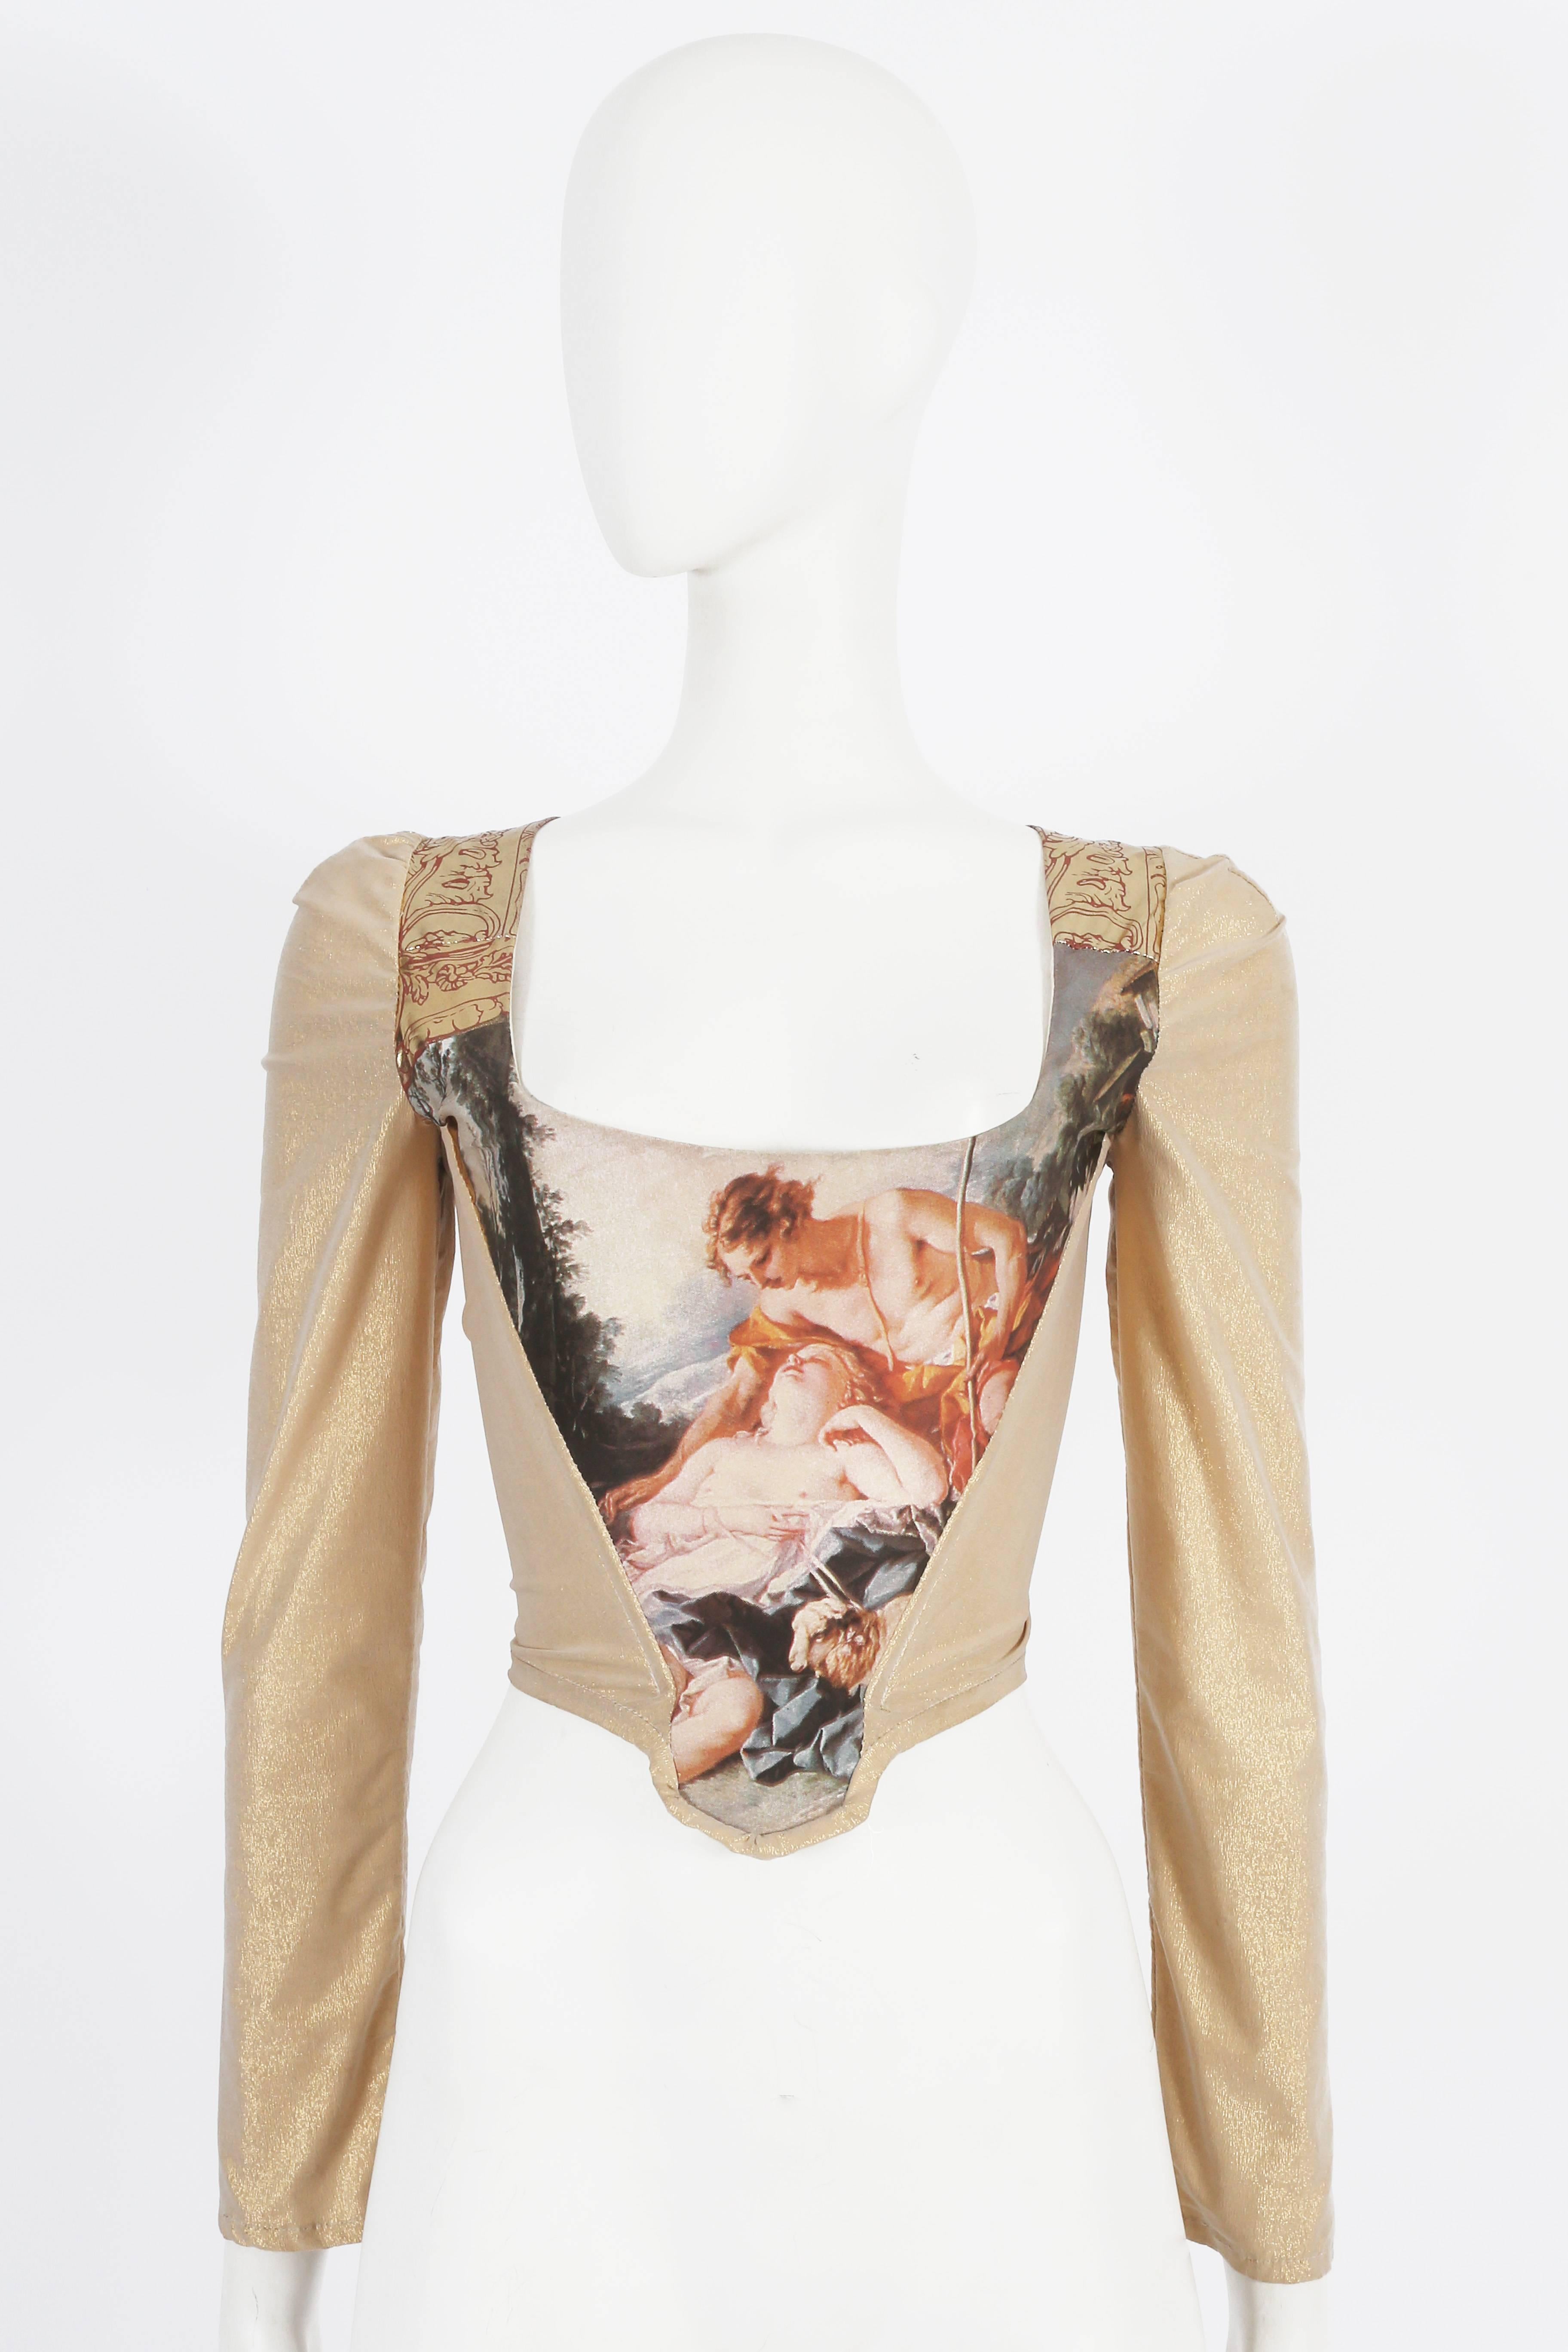 Rare and iconic Vivienne Westwood corset from the 'Portrait Collection' autumn-winter 1990. Features the François Boucher oil paiting 'Daphnis and Chloe' c. 1743.